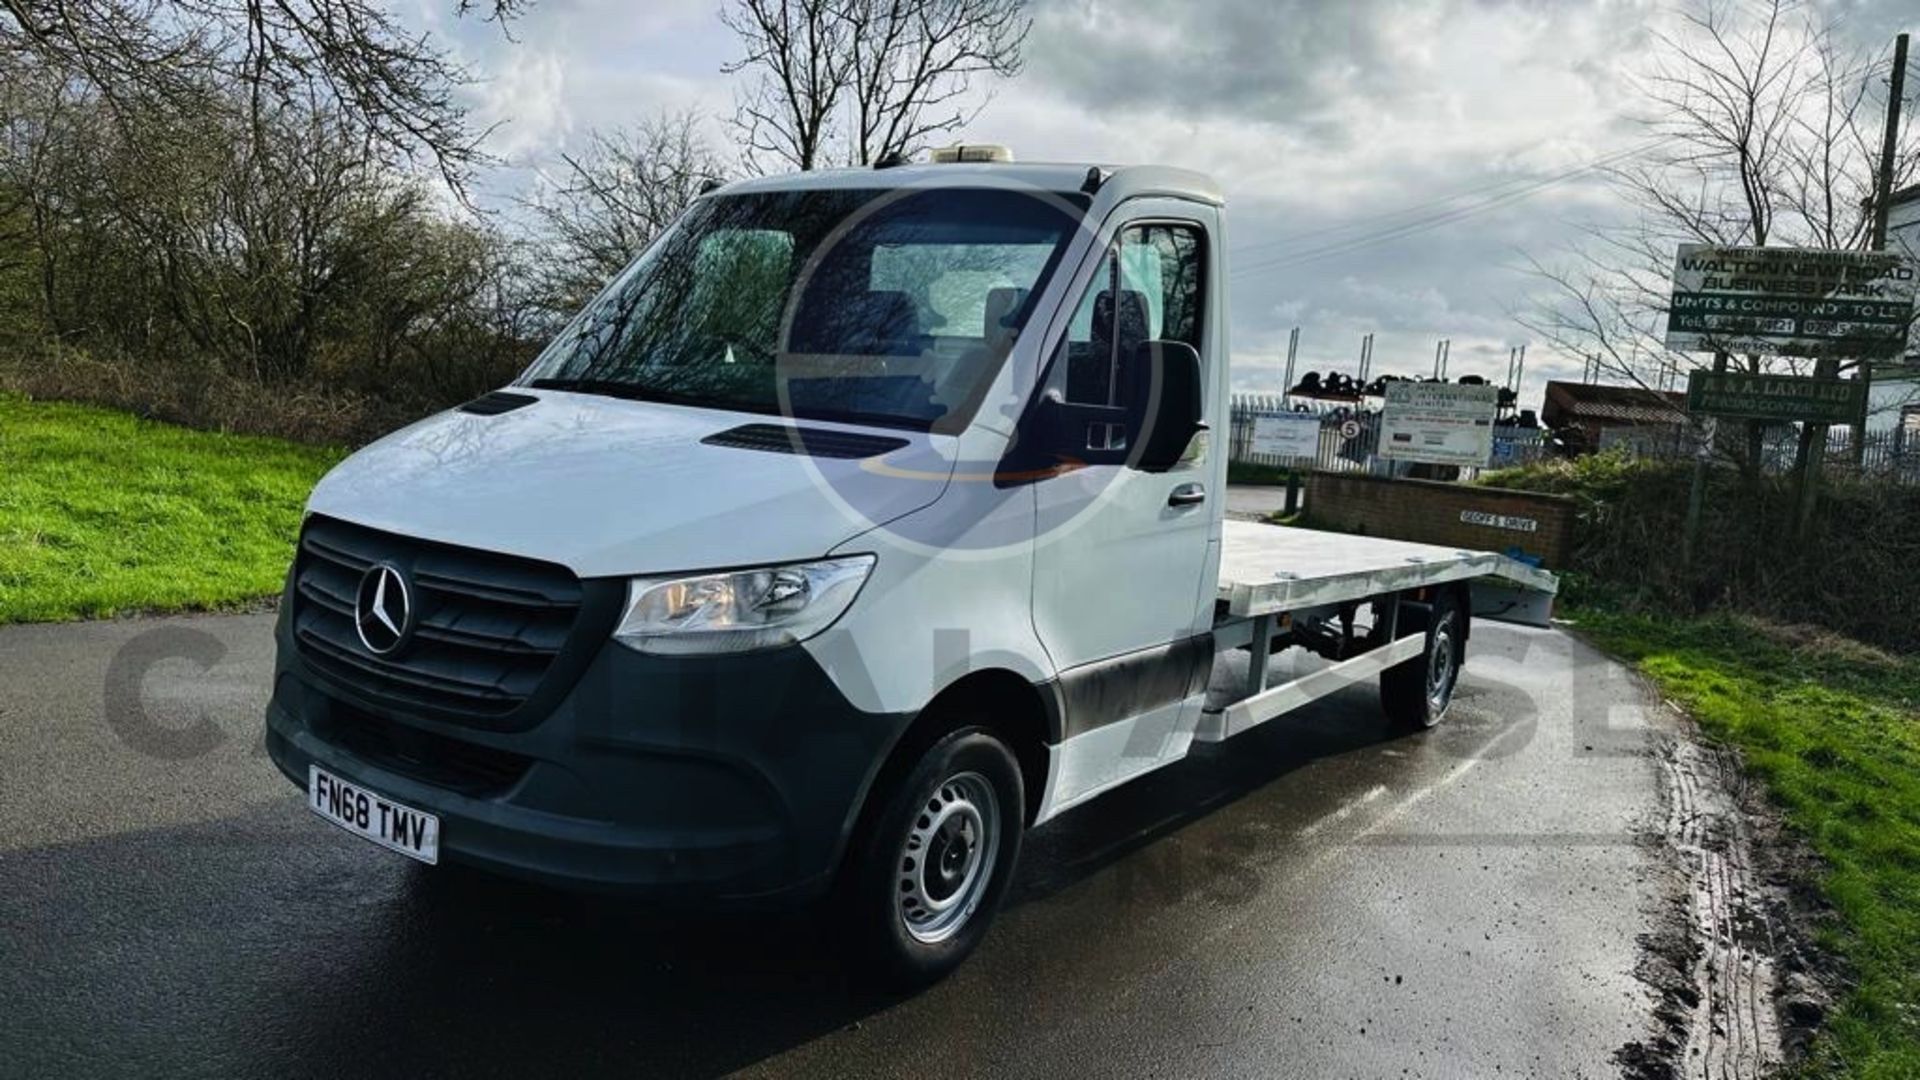 MERCEDES SPRINTER 314CDI "LWB RECOVERY TRUCK" 2019 MODEL - 1 OWNER - NEW BODY FITTED WITH ELEC WINCH - Image 7 of 37